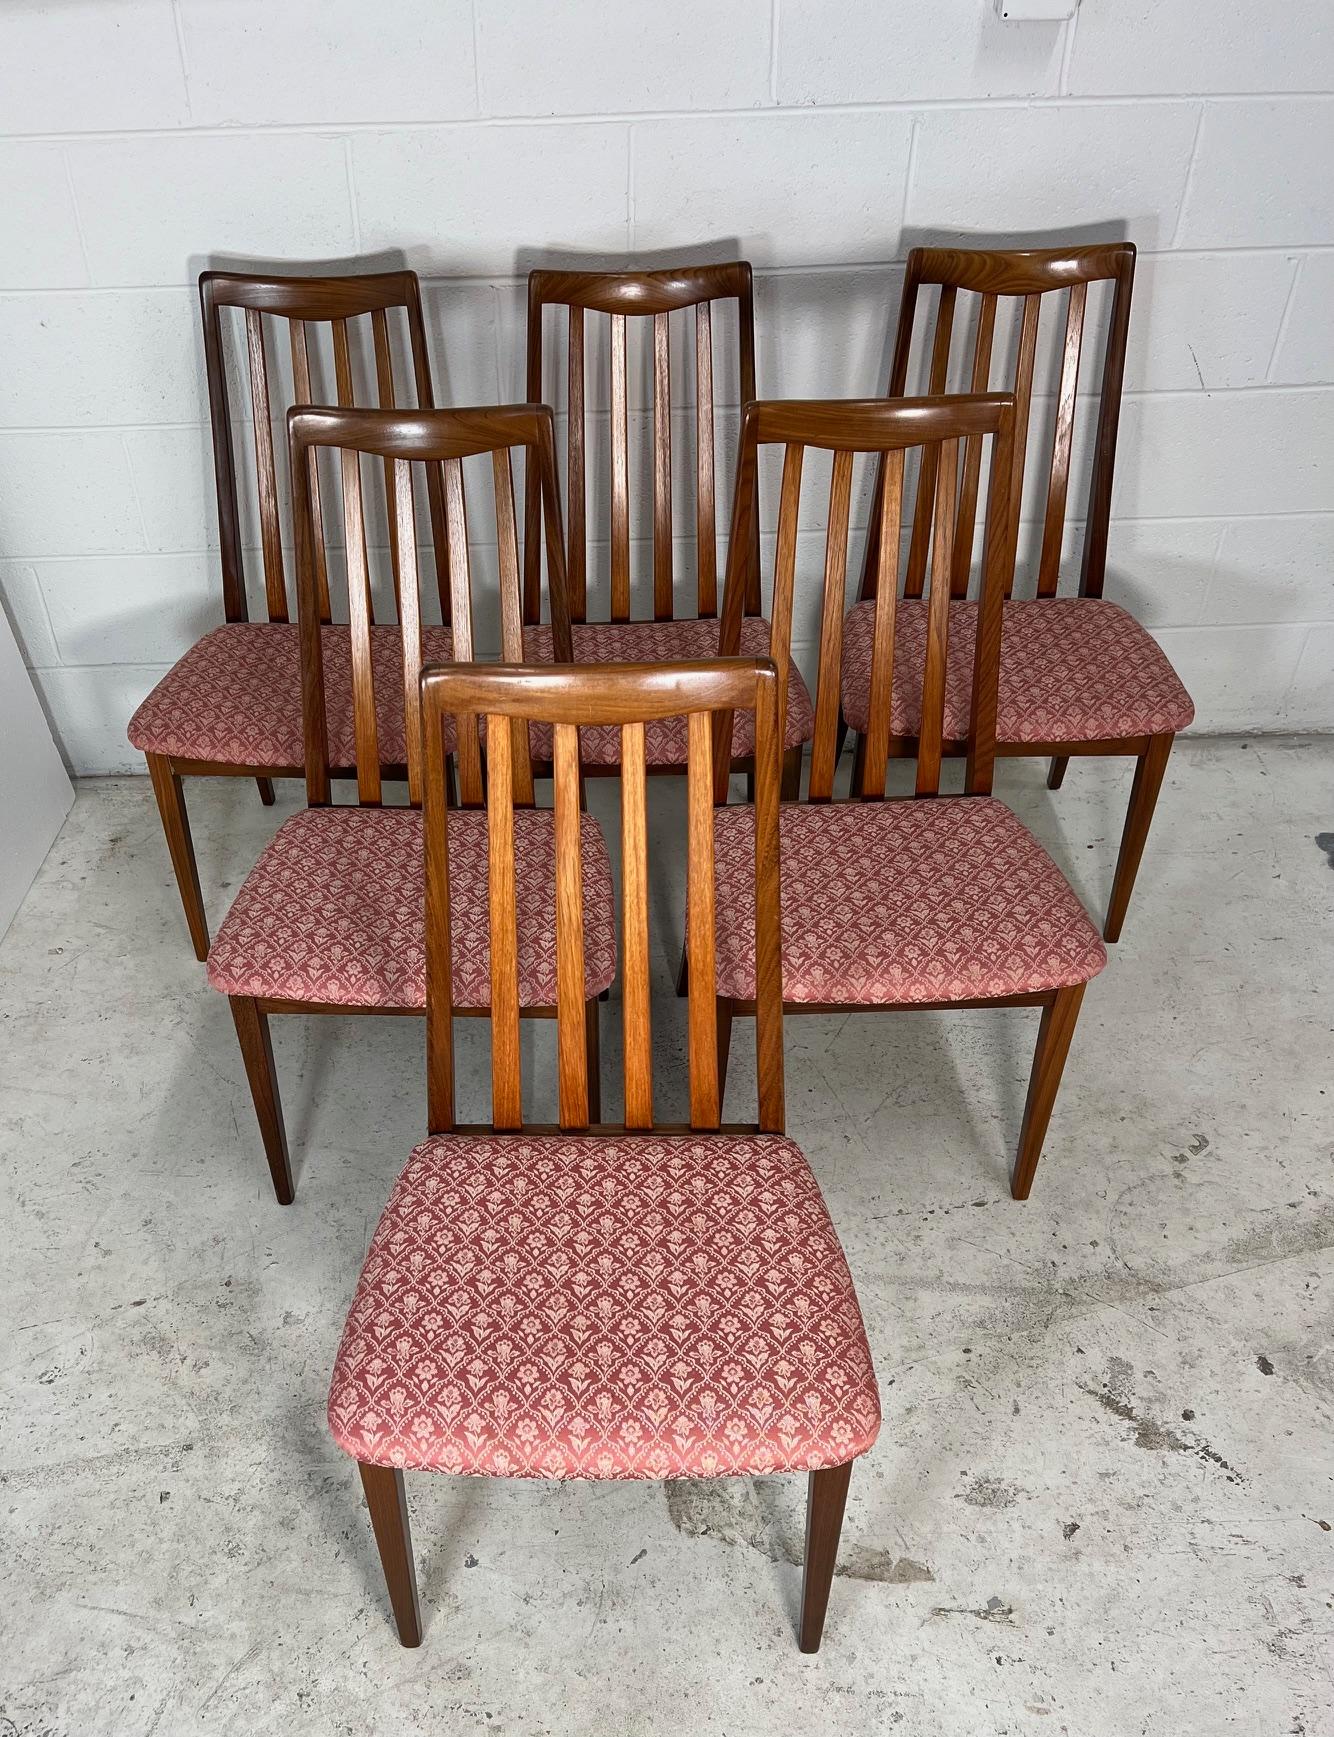 Set of 6 mid century teak chairs by G Plan.

Very good vintage condition. Some minor marks on the frames. Some of the chairs have had the joints glued in the past. All the chairs are very sturdy with no loose joints.

Dimensions: W x D x H

19